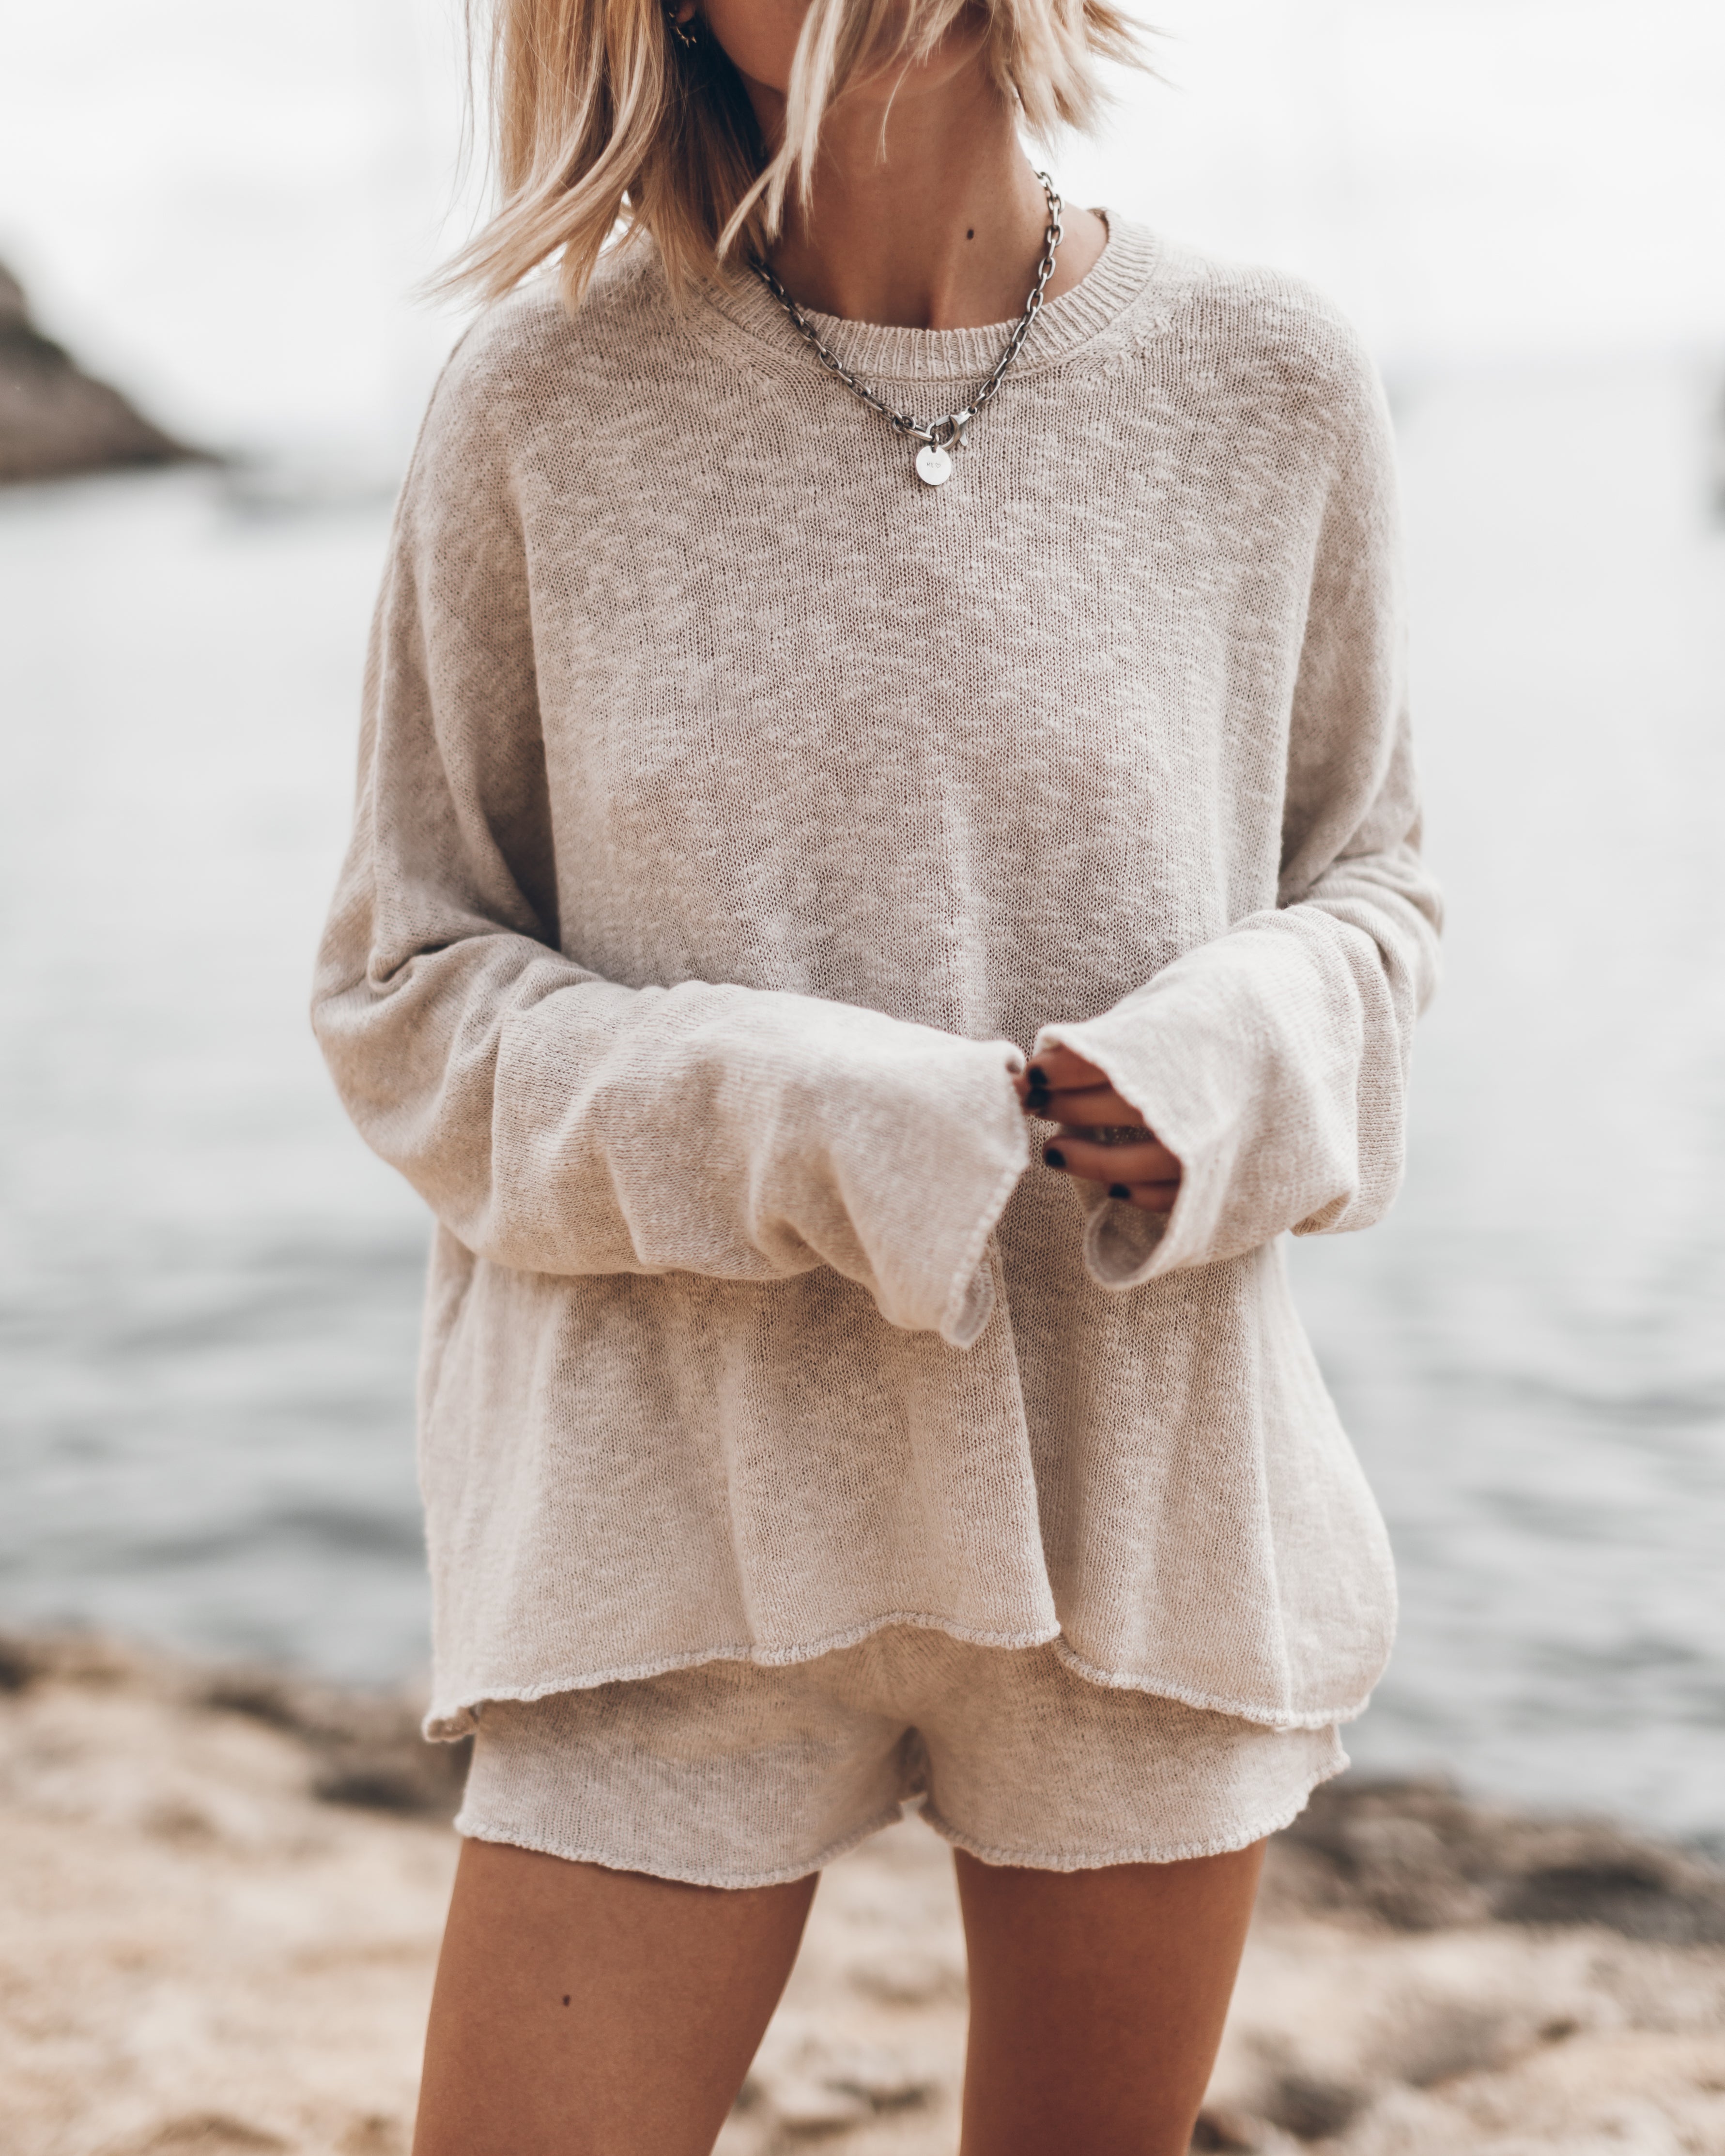 The Light Thin Knit Sweater